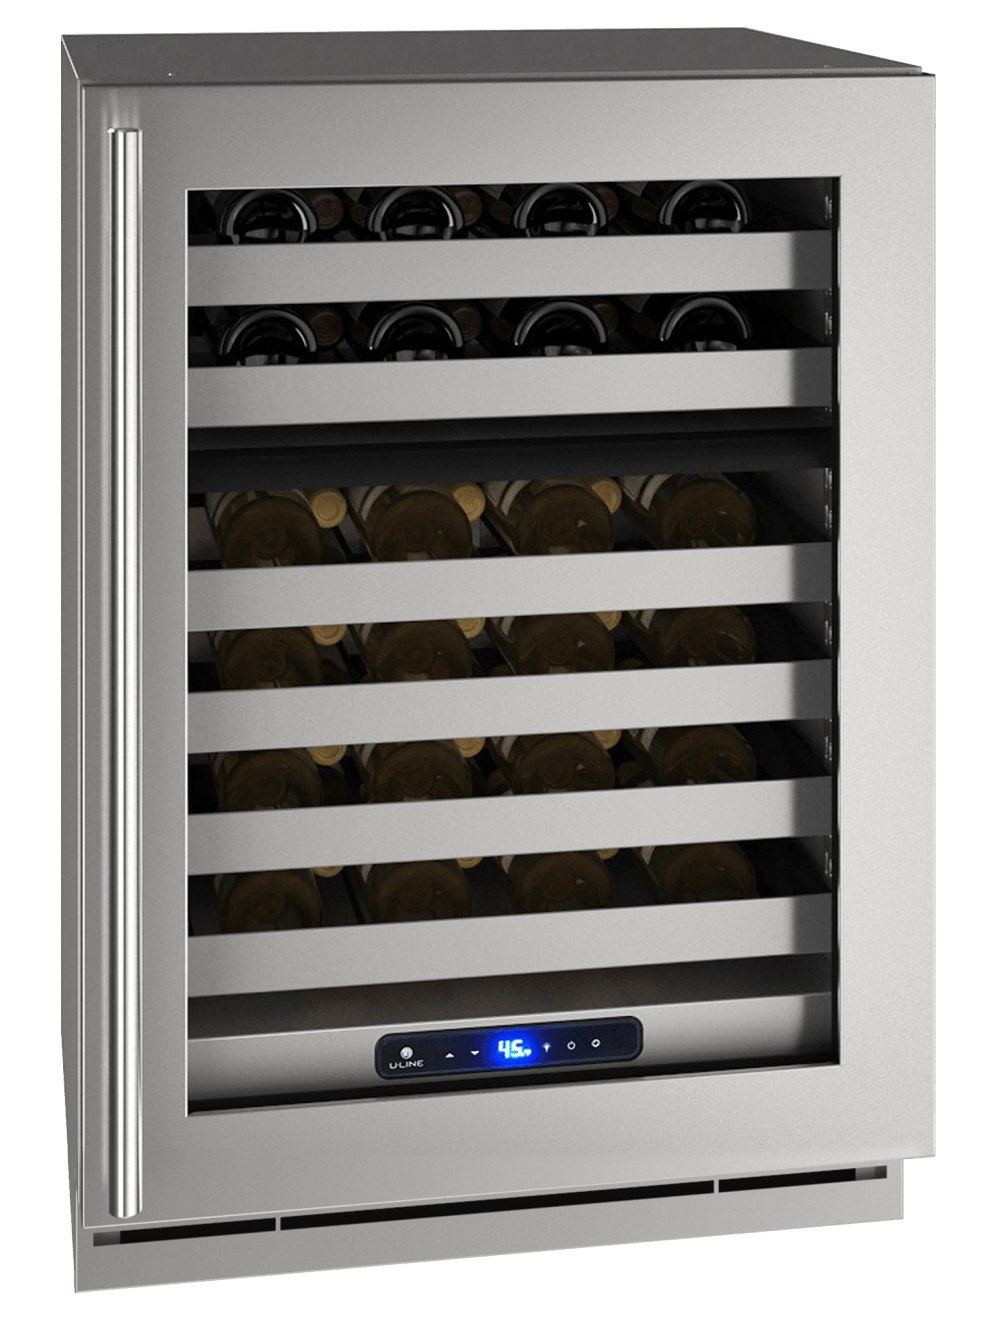 U-Line HWD524 24" Dual-Zone Wine Refrigerator Reversible Hinge Wine Coolers UHWD524-SG01A Luxury Appliances Direct